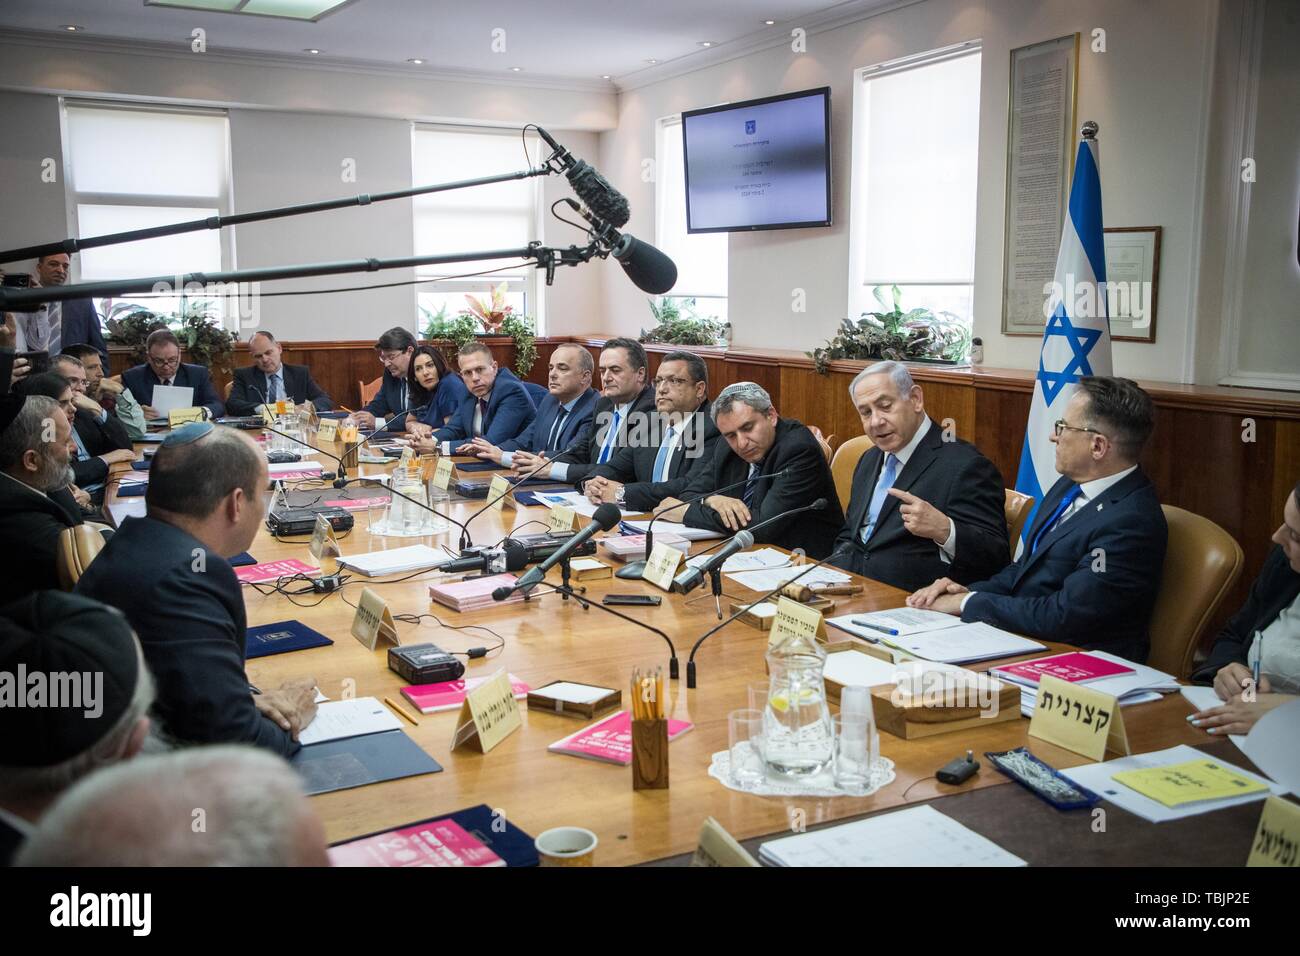 Jerusalem. 2nd June, 2019. Israeli Prime Minister Benjamin Netanyahu (2nd R) attends the weekly cabinet meeting in Jerusalem, June 2, 2019. The Israeli parliament, known as the Knesset, dissolved itself last Wednesday and scheduled another general election for mid-September of this year. The development came after Israeli Prime Minister Benjamin Netanyahu failed to form a coalition government. Credit: JINI/Yonatan Sindel/Xinhua/Alamy Live News Stock Photo